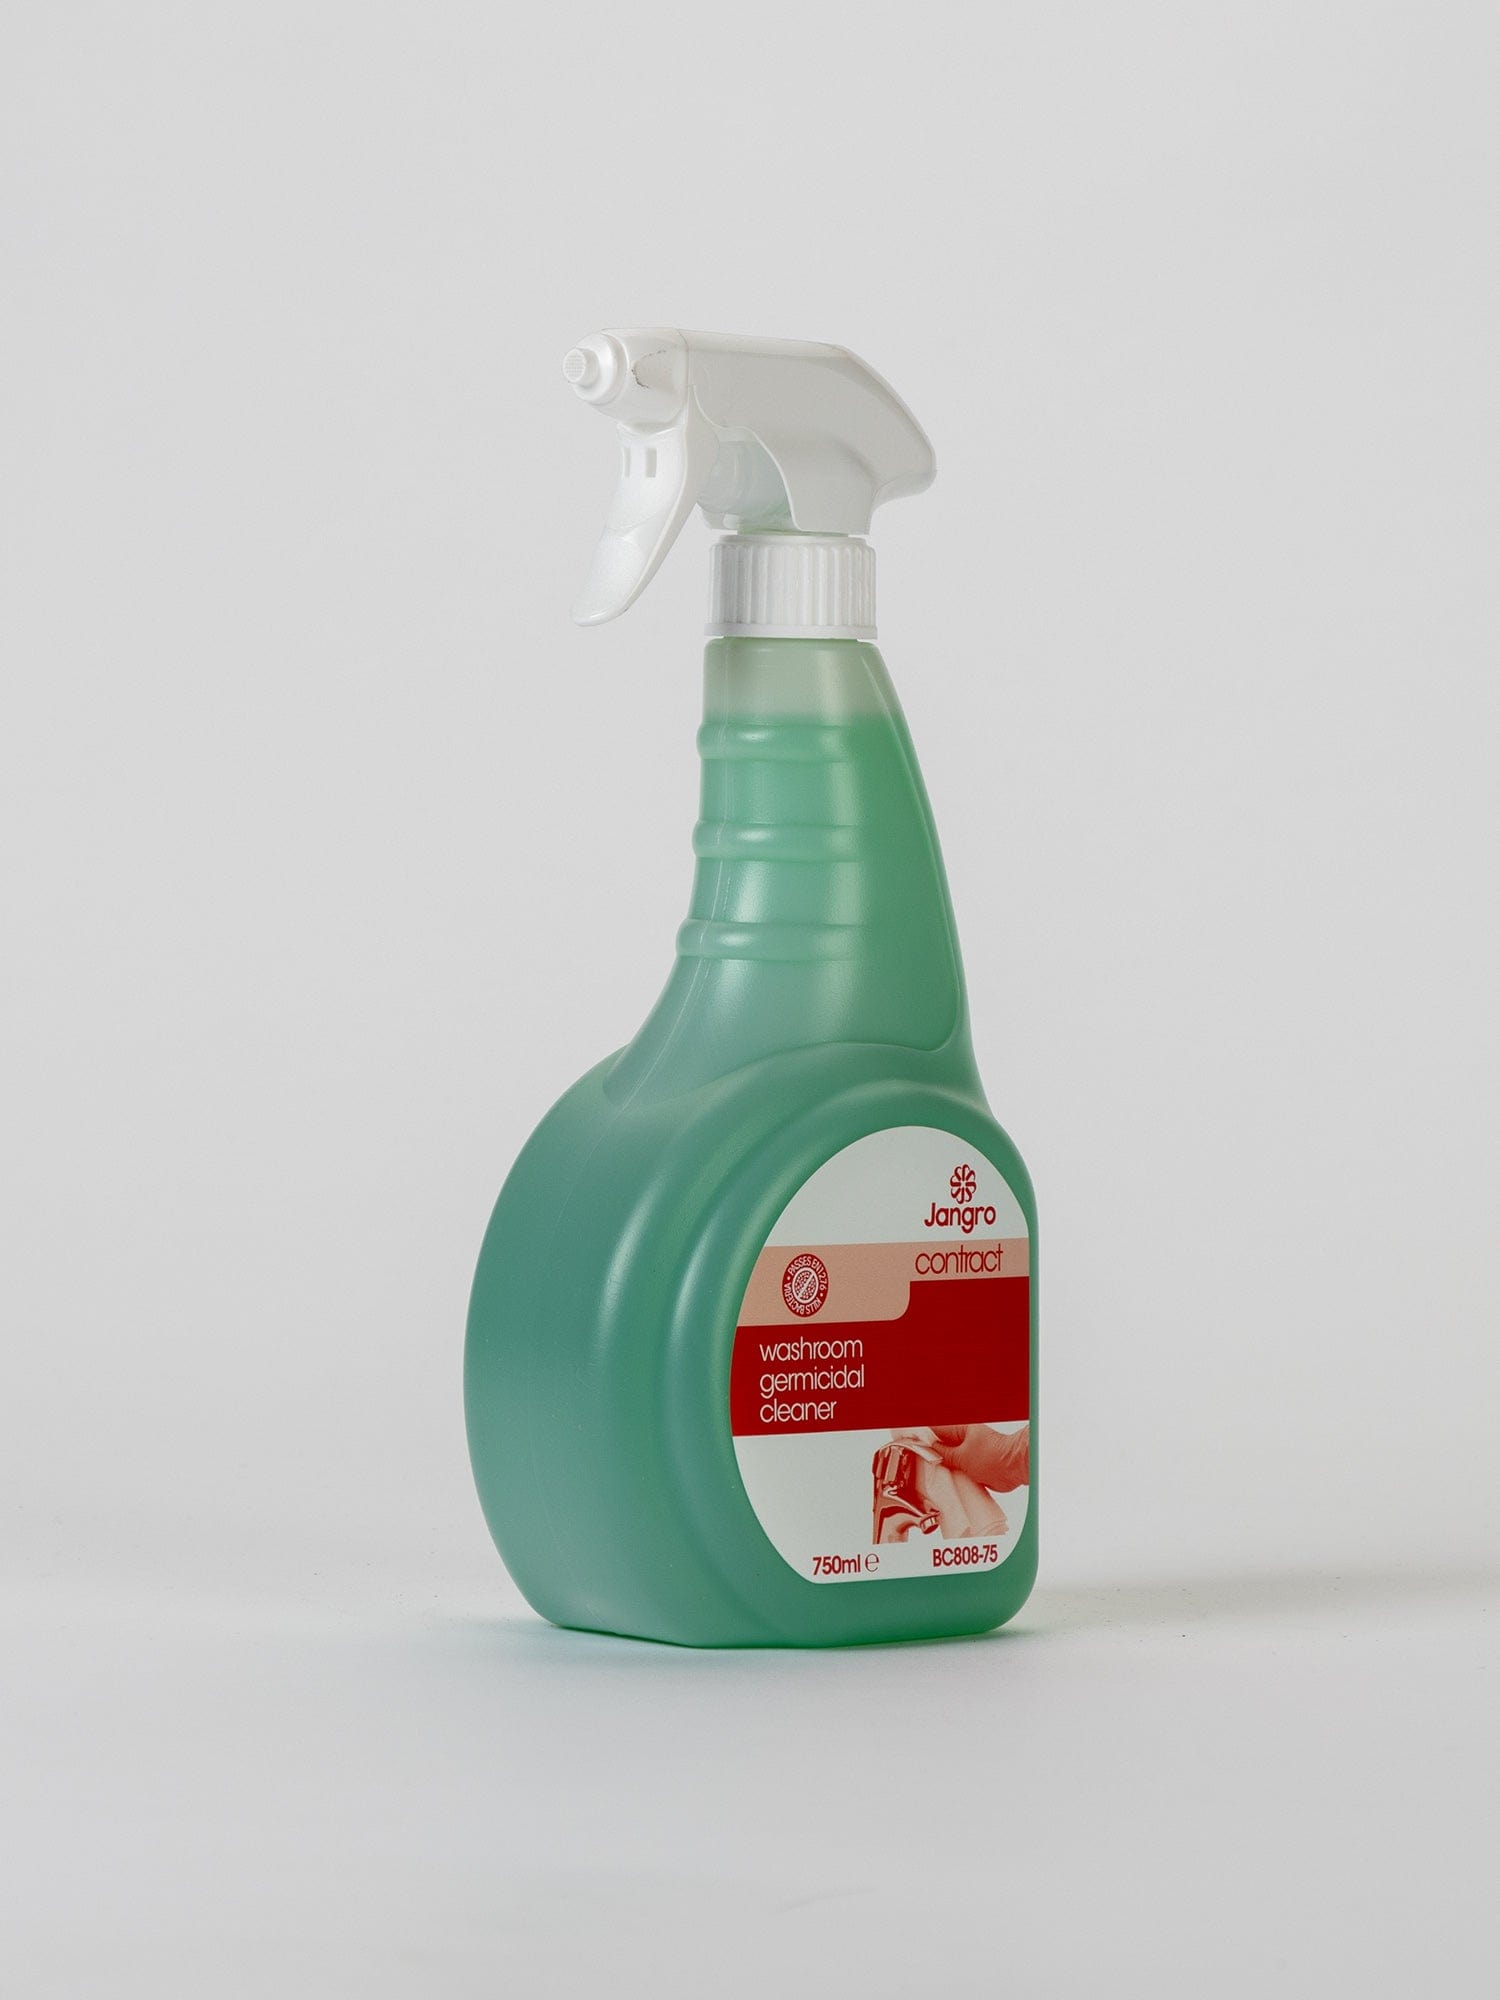 limescale buildup bacteria cleaner